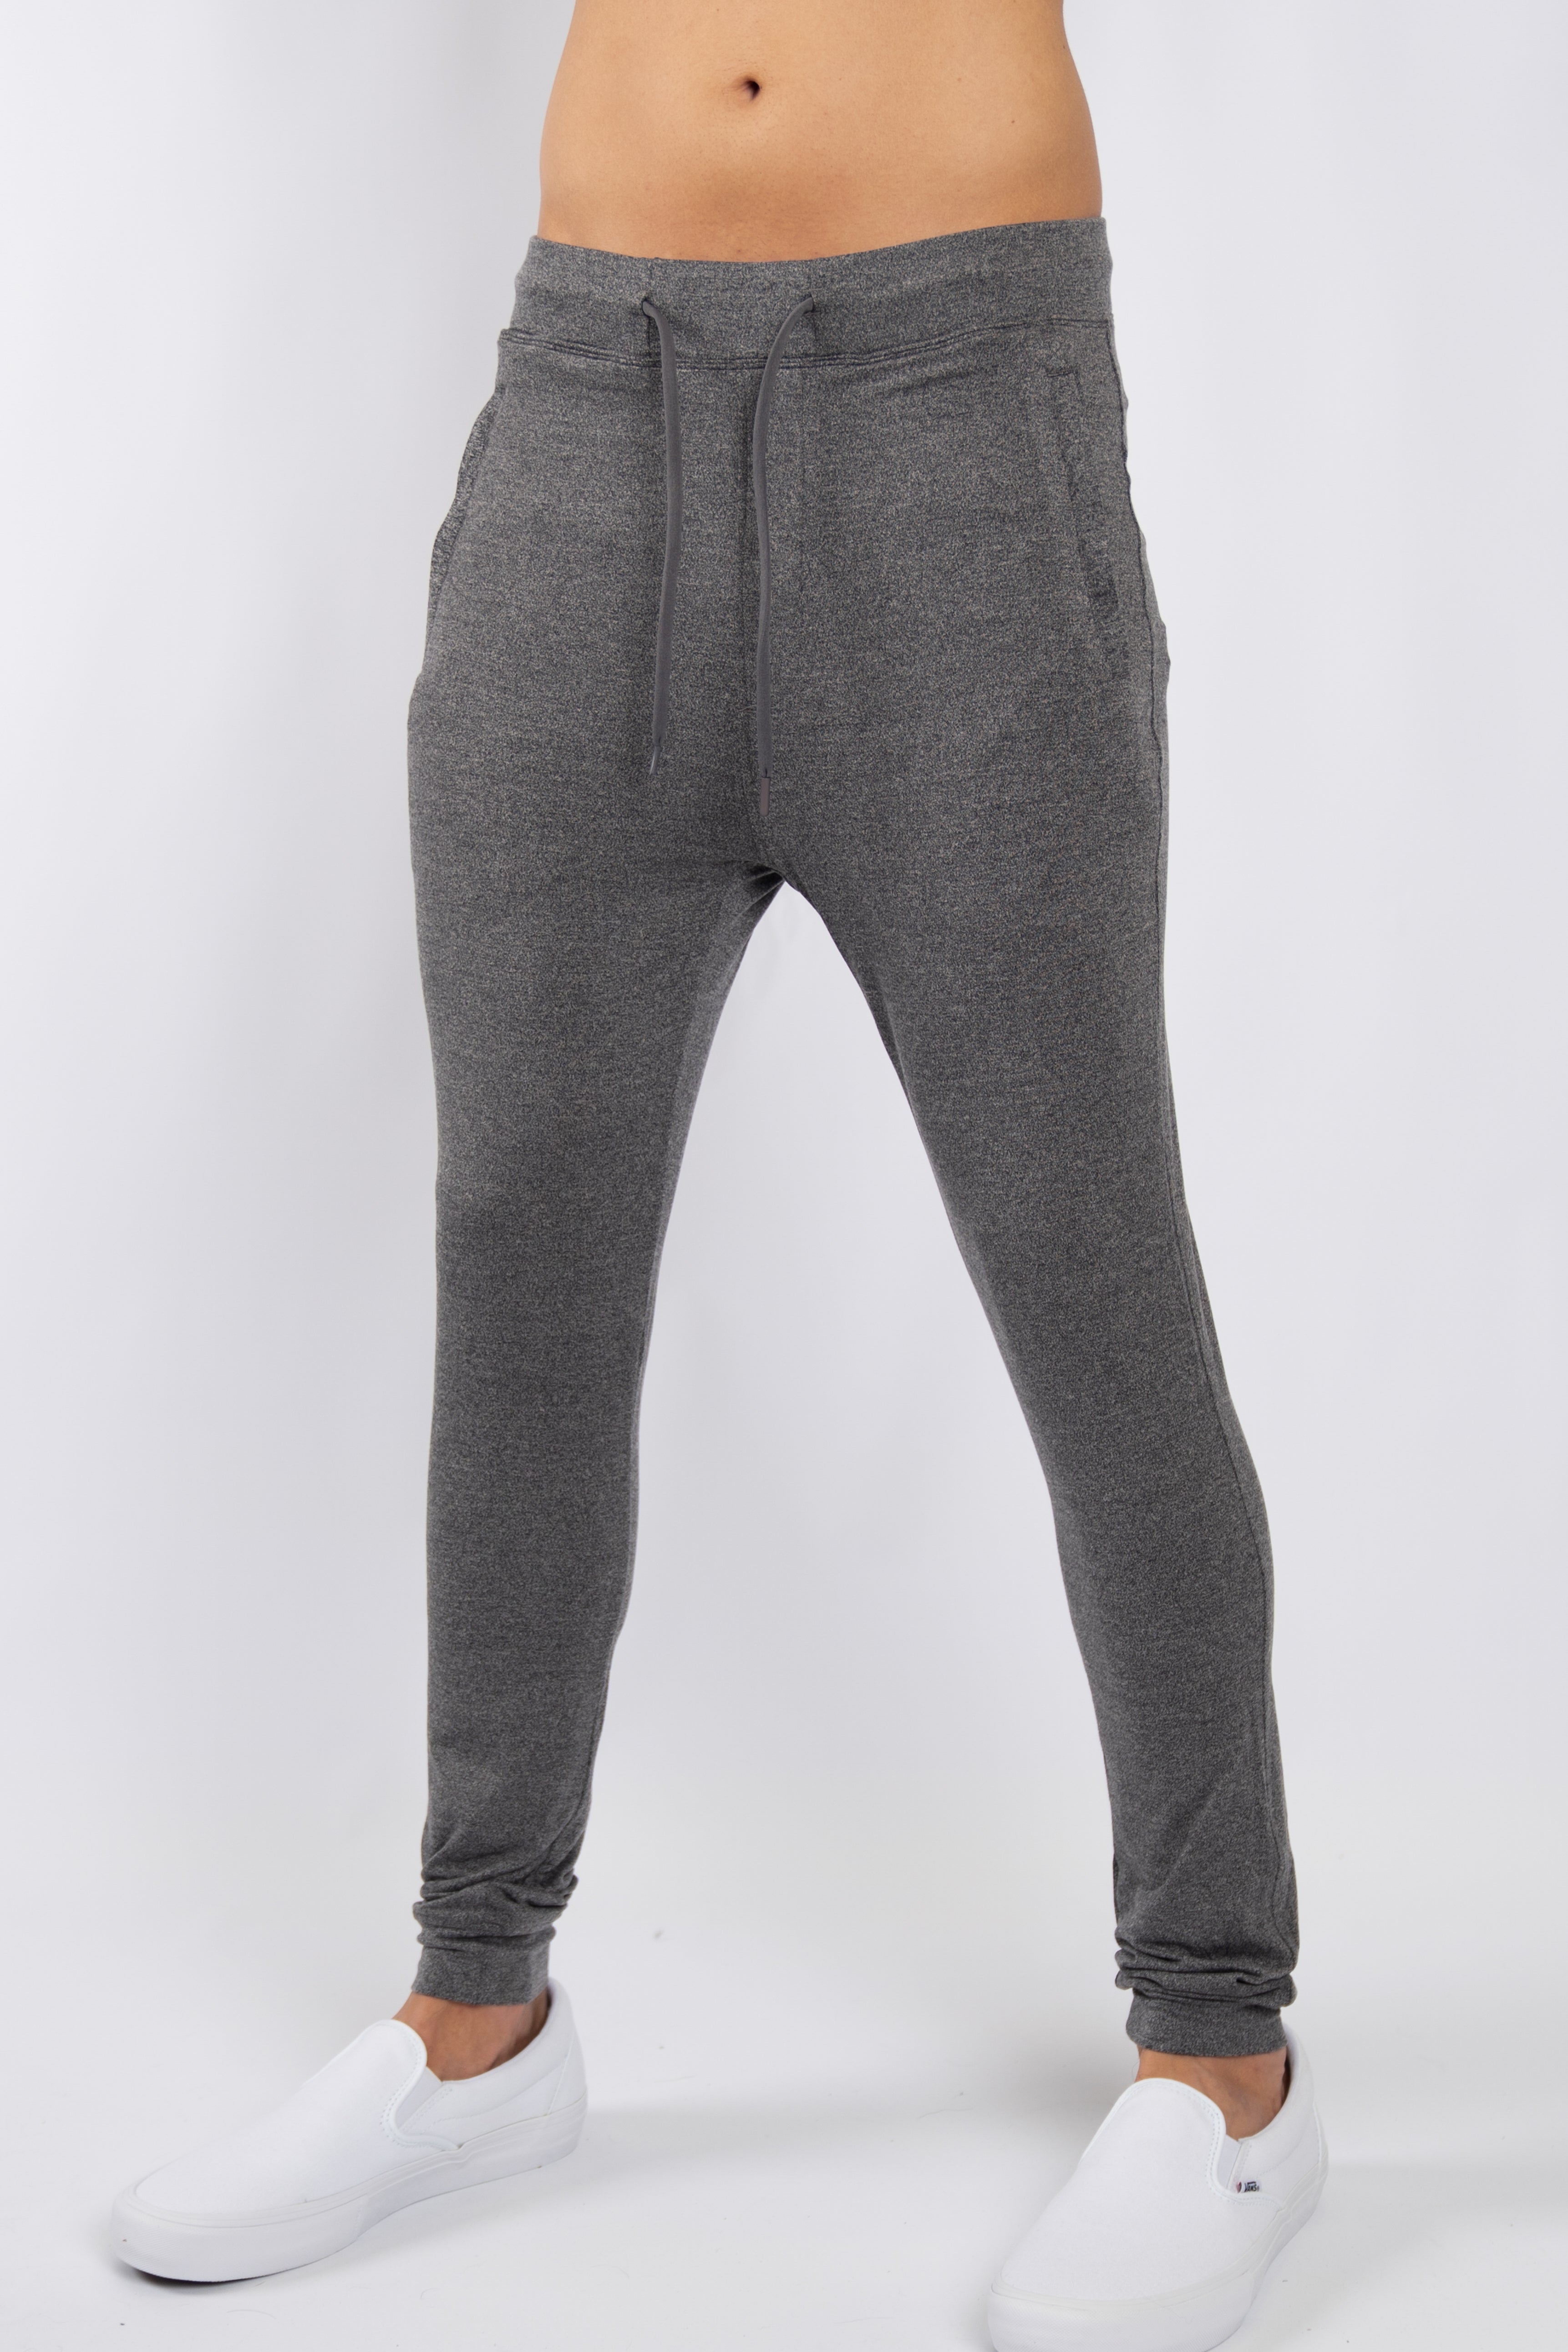 Men's Premium Joggers in Charcoal Gray - Southern Athletica